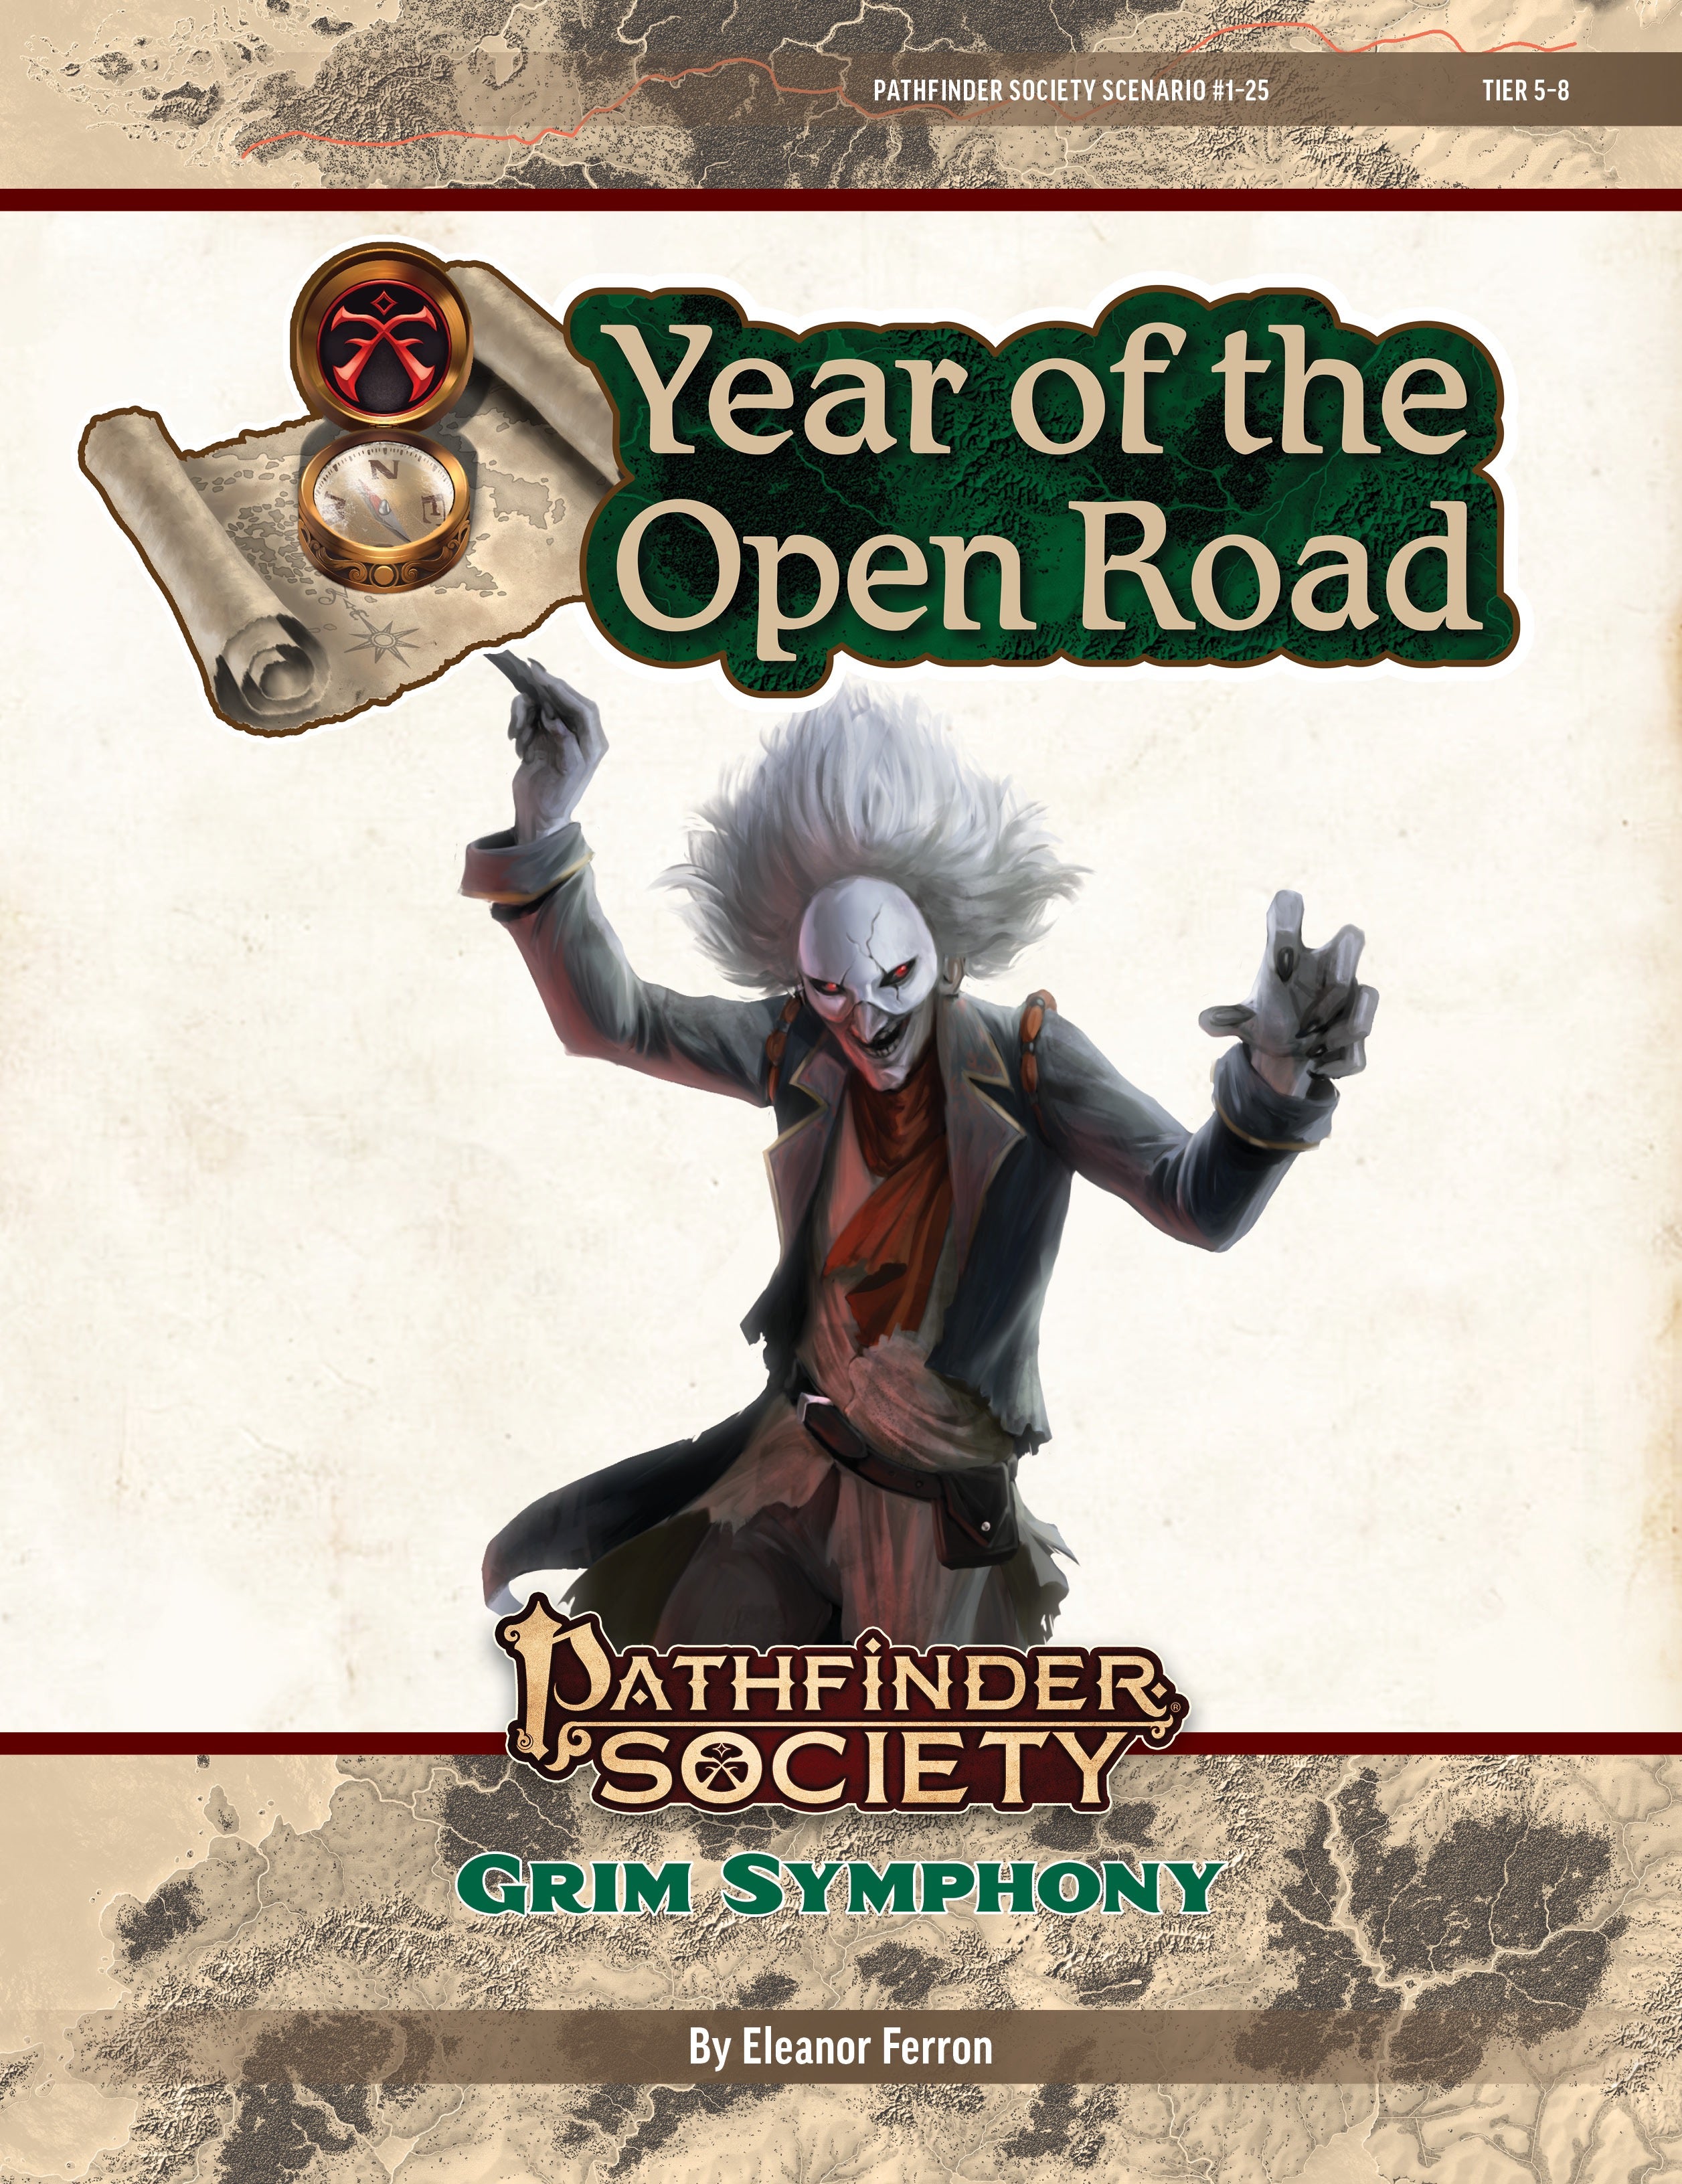 Pathfinder Society Year Of The Open Rode: Grim Symphony. A masked conductor gesturing wildly with their baton